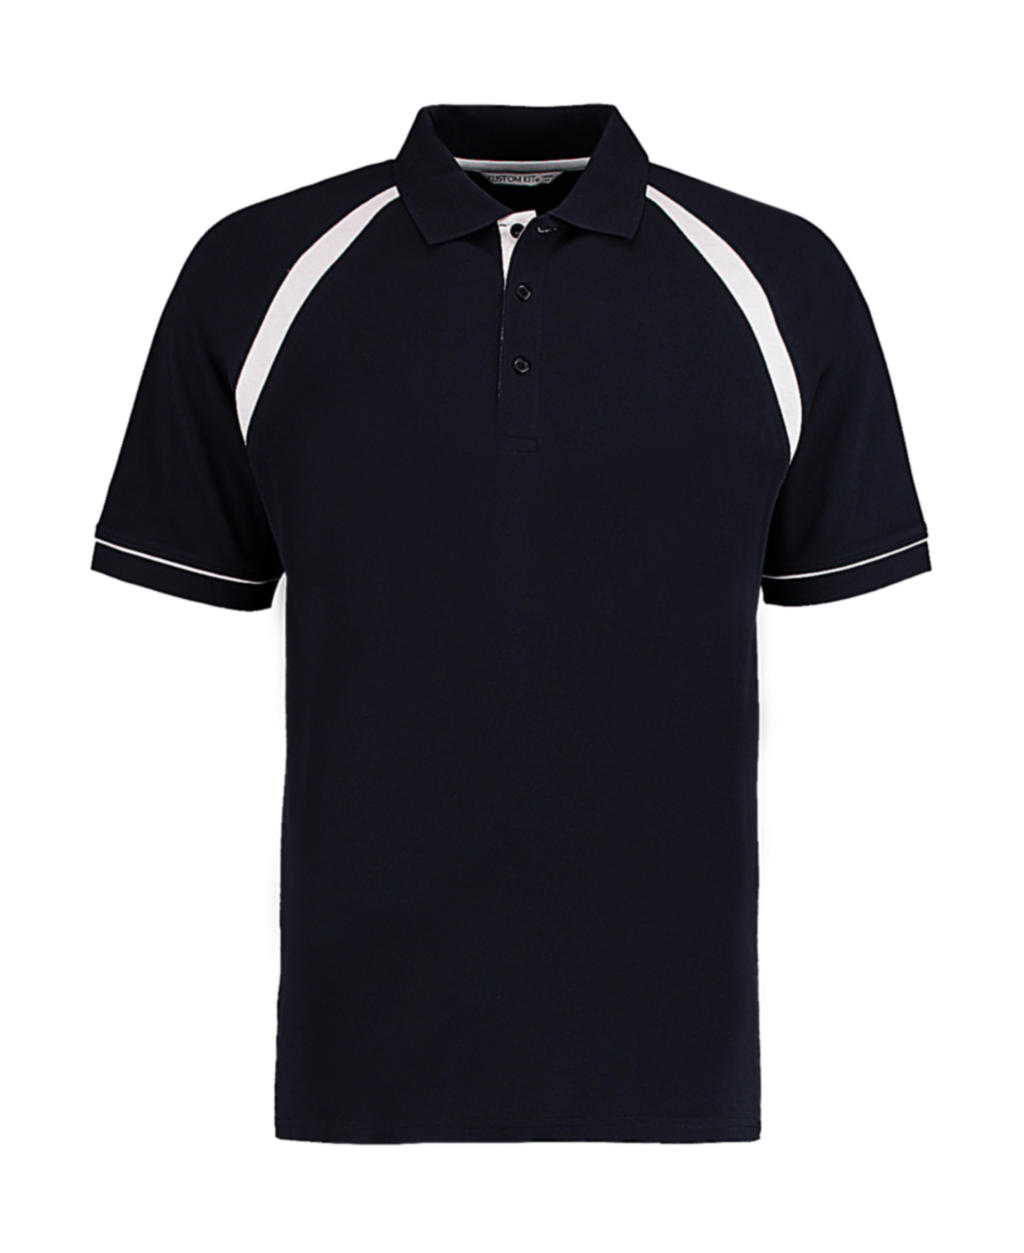 515.11 / Classic Fit Oak Hill Polo / Navy/White